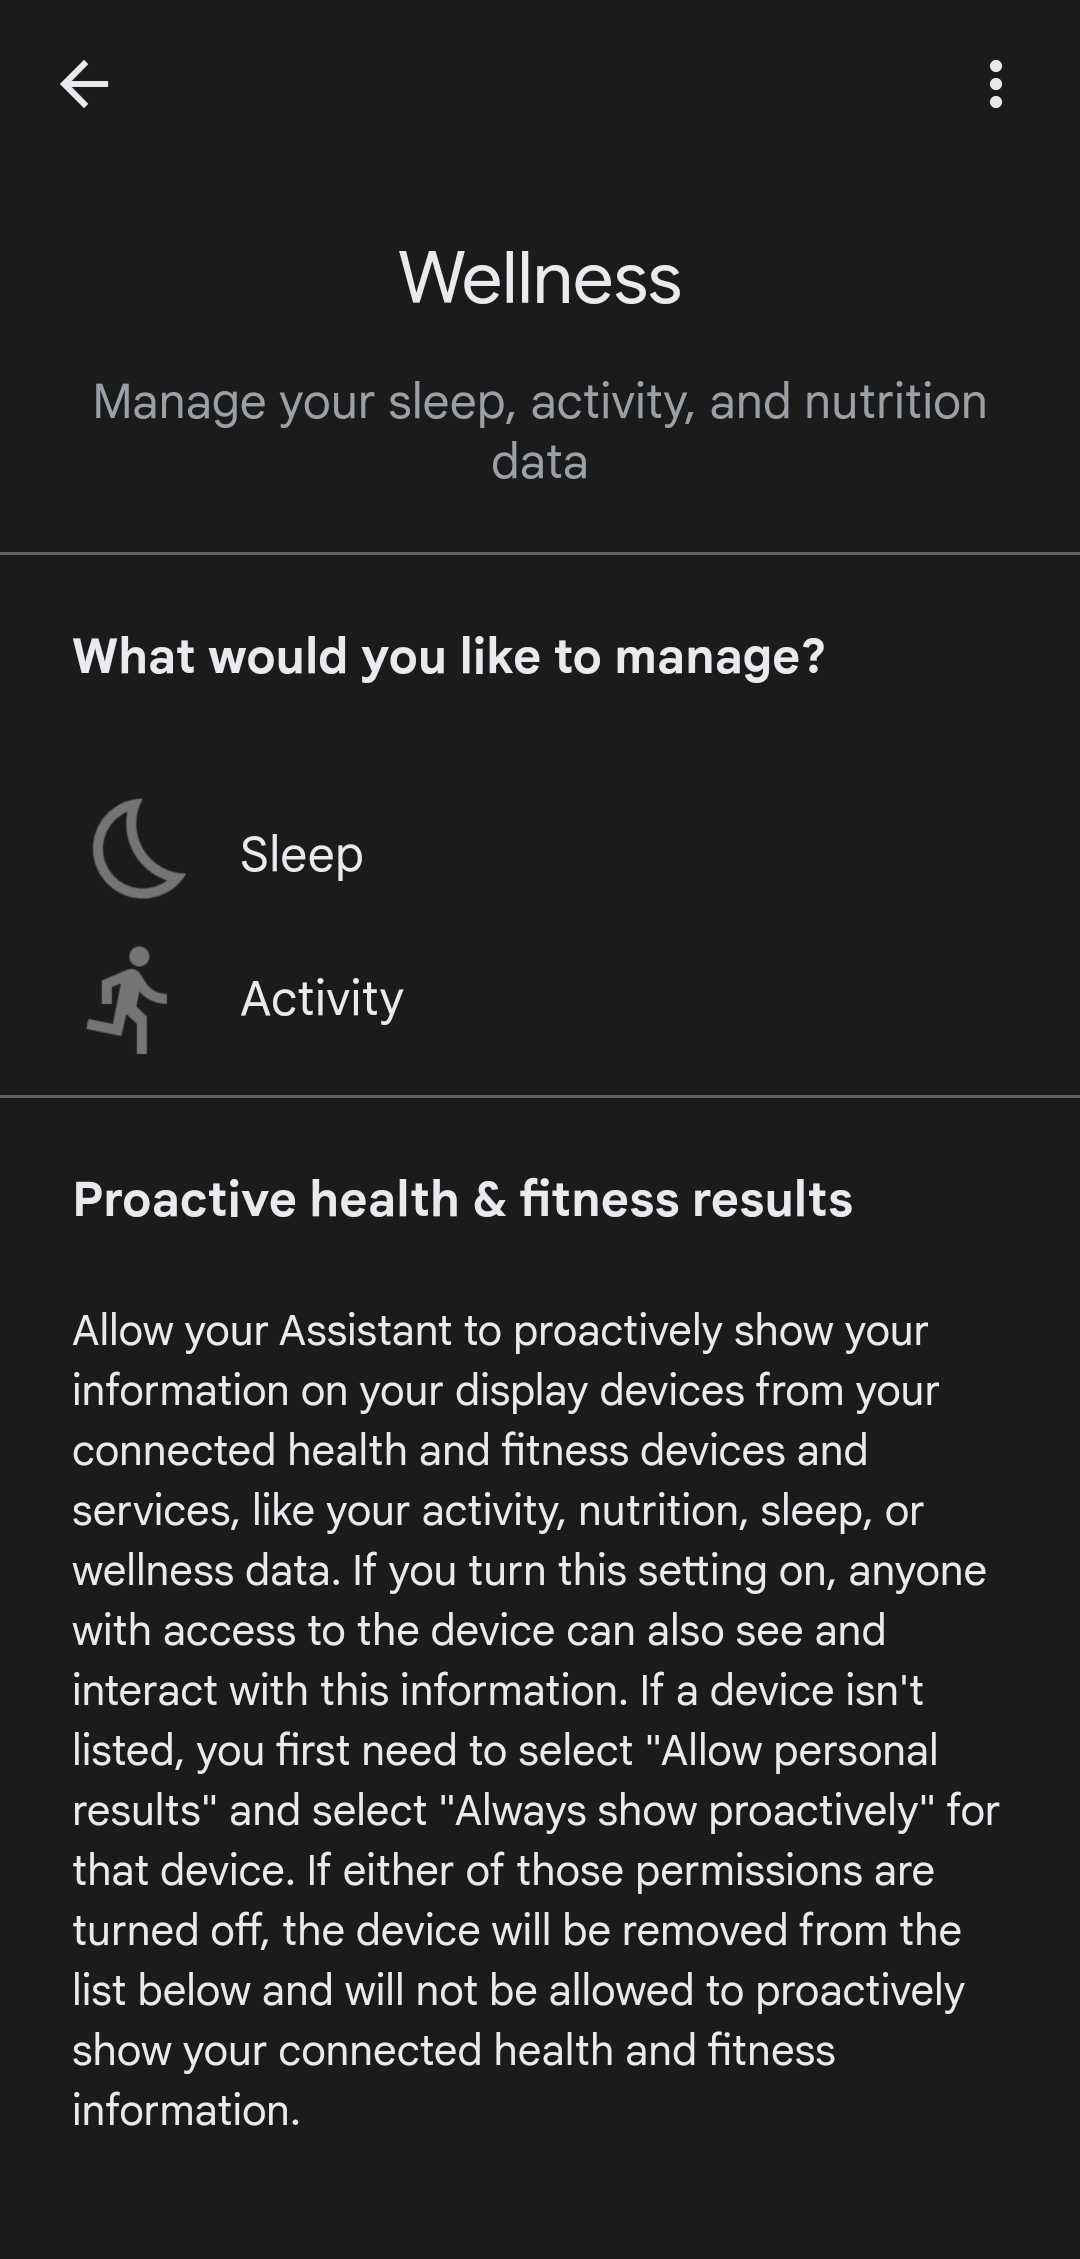 Google Fit and Fitbit integration with Assistant